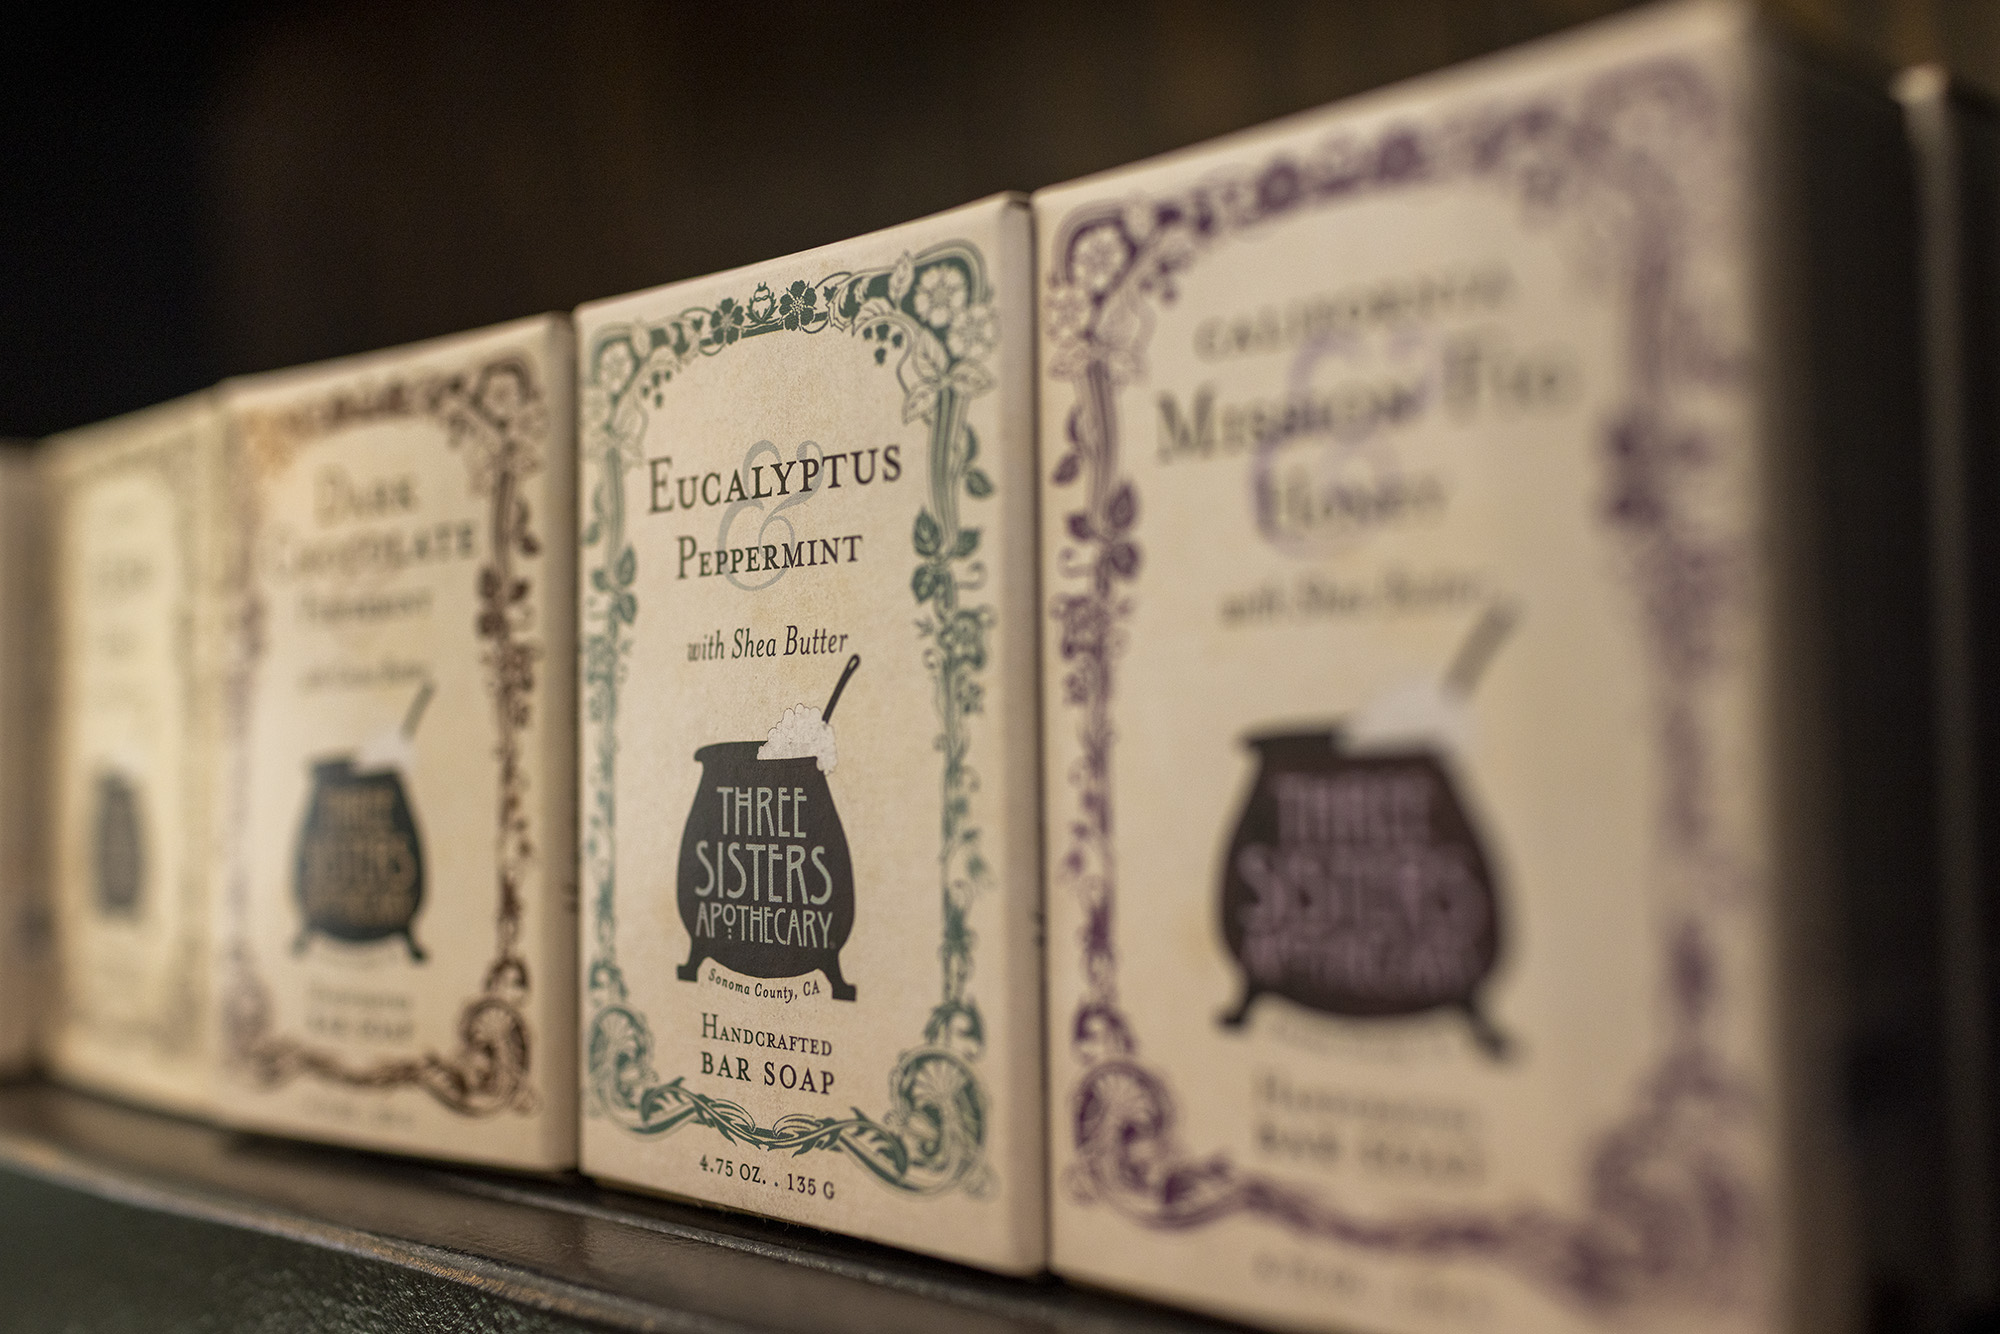 Three Sisters Apothecary handcrafted bar soaps. Featured is eucalyptus with shea butter